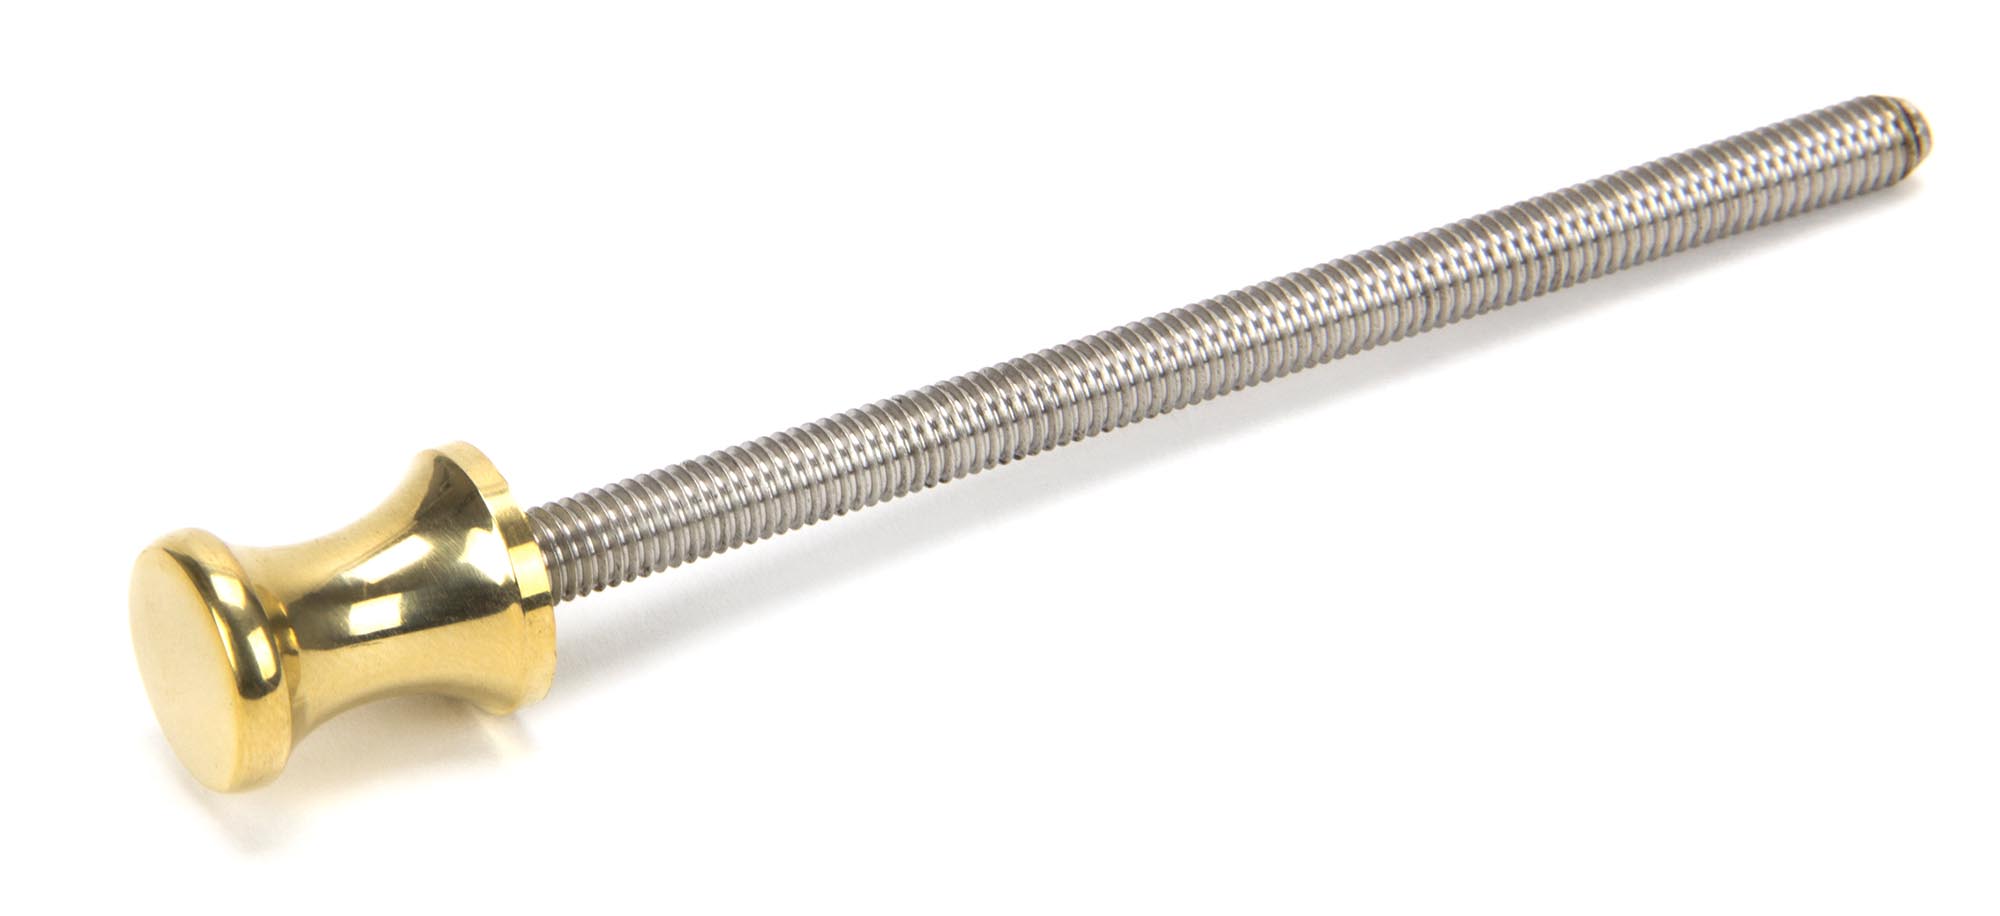 FTA 90437 POLISHED BRASS ENDED SS M6 110MM THREADED BAR